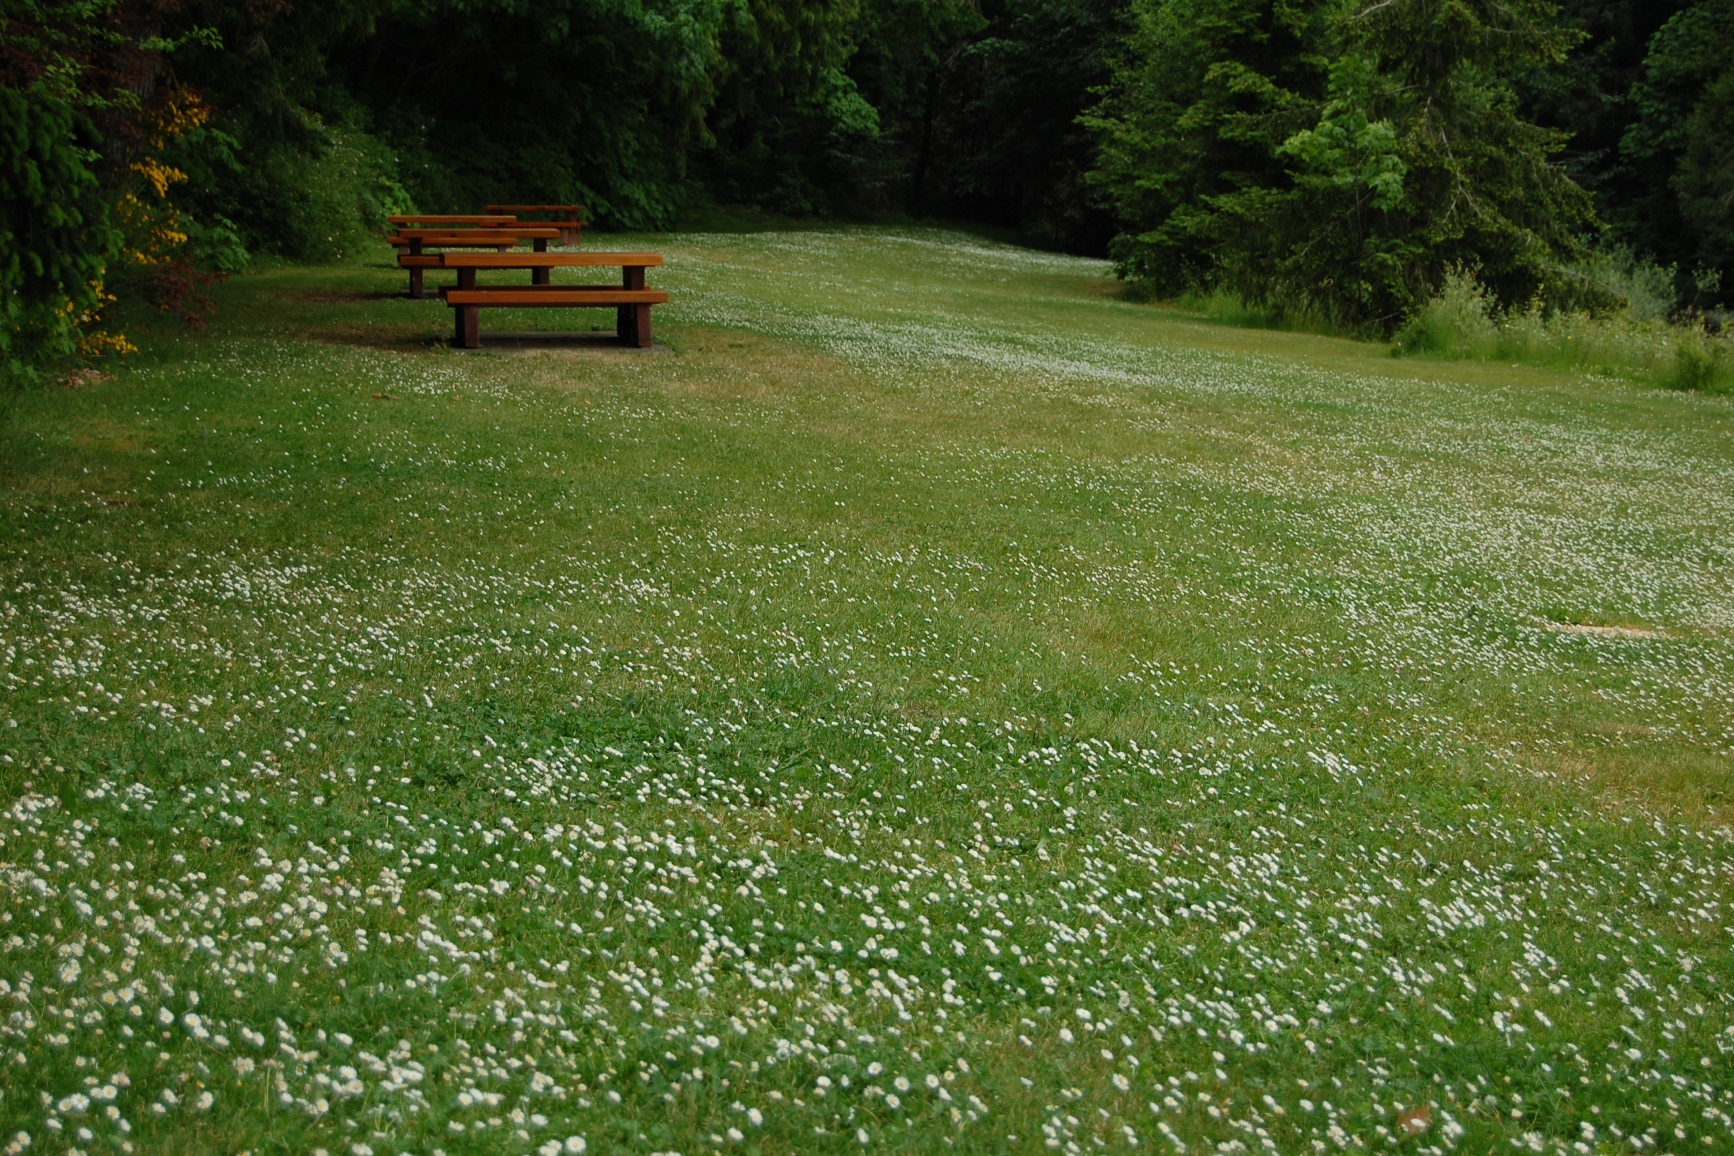 Benches arranged on a hill with various flowers and vegetation.